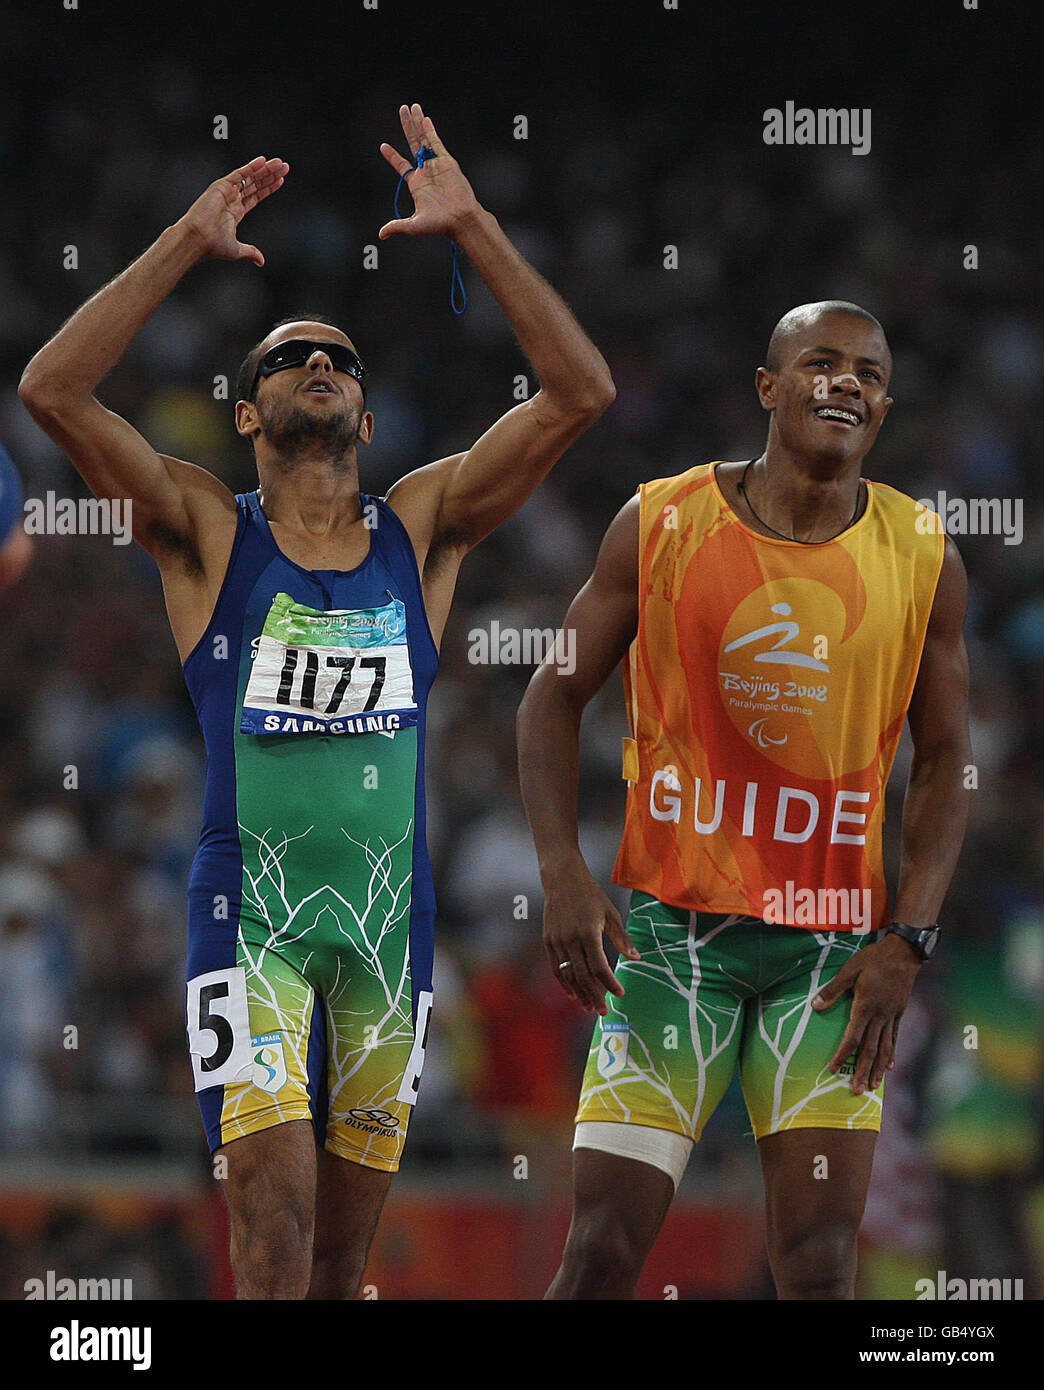 Paralympics - Beijing Paralympic Games 2008 - Day Ten. Brazil's Lucas Prado celebrates winning gold with his guide in the men's 400M T11 Final in the National Stadium, in Beijing, China. Stock Photo